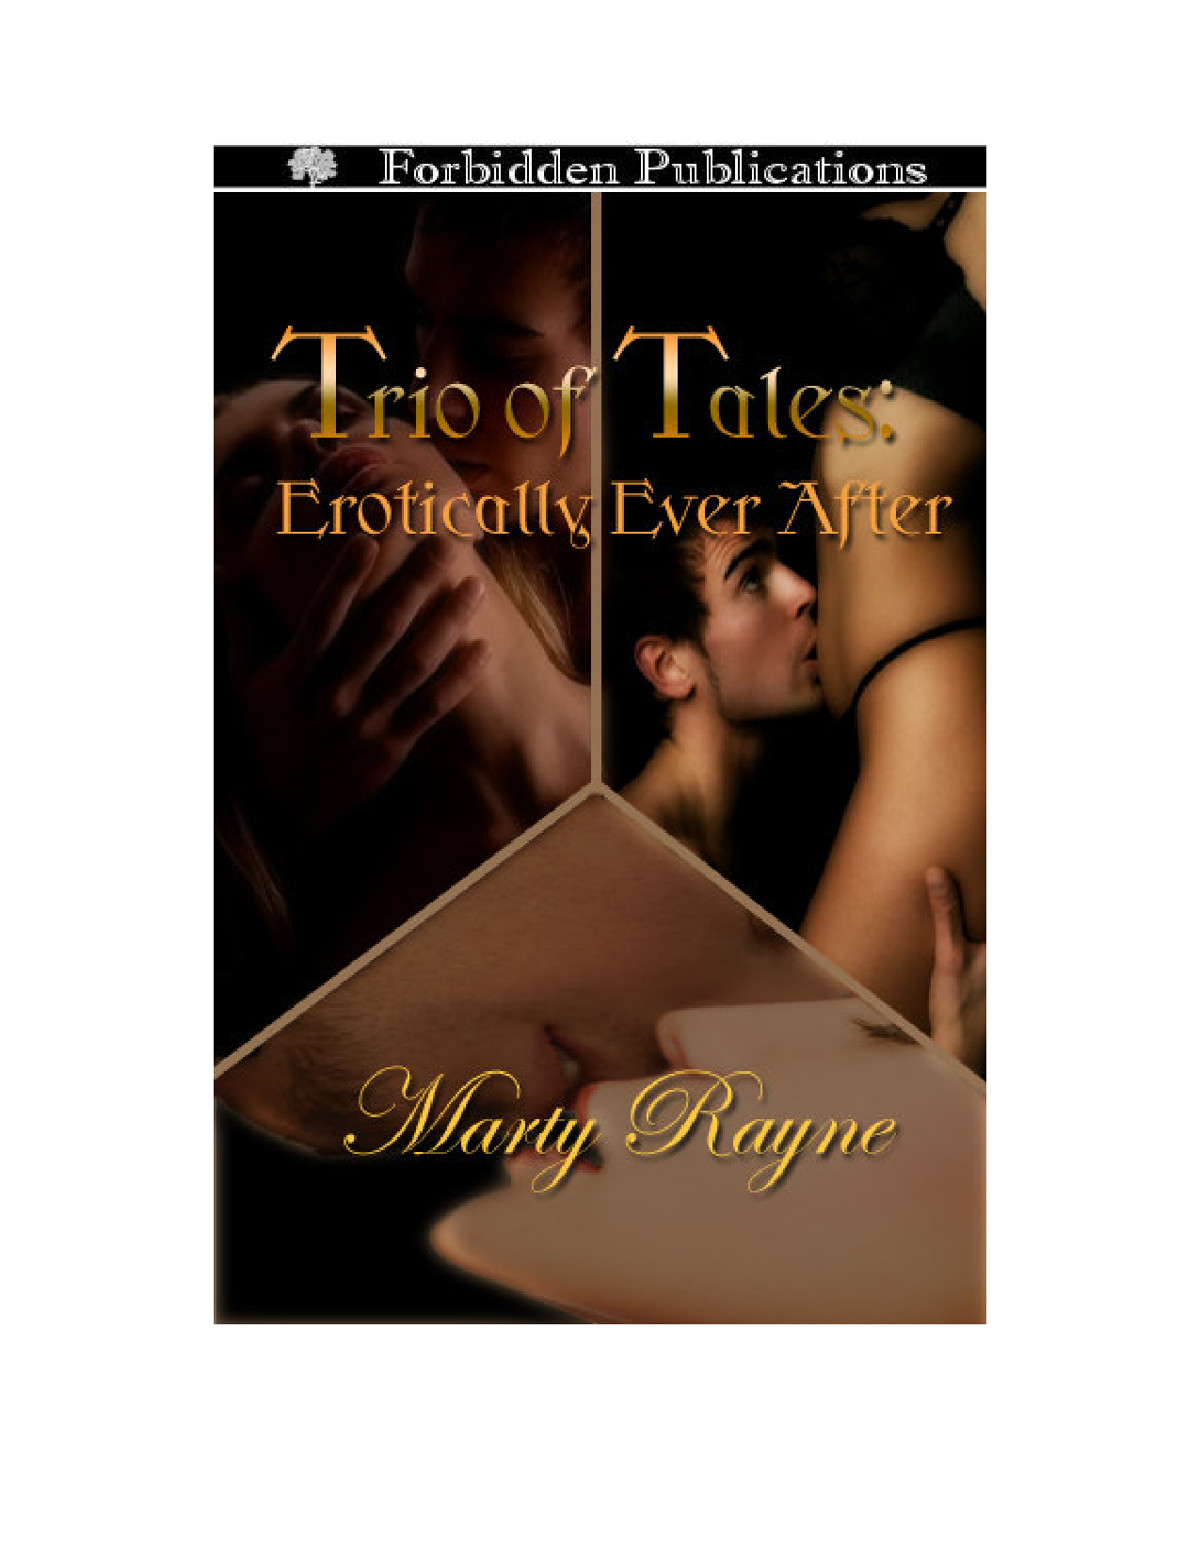 Trio of tales:erotically ever after